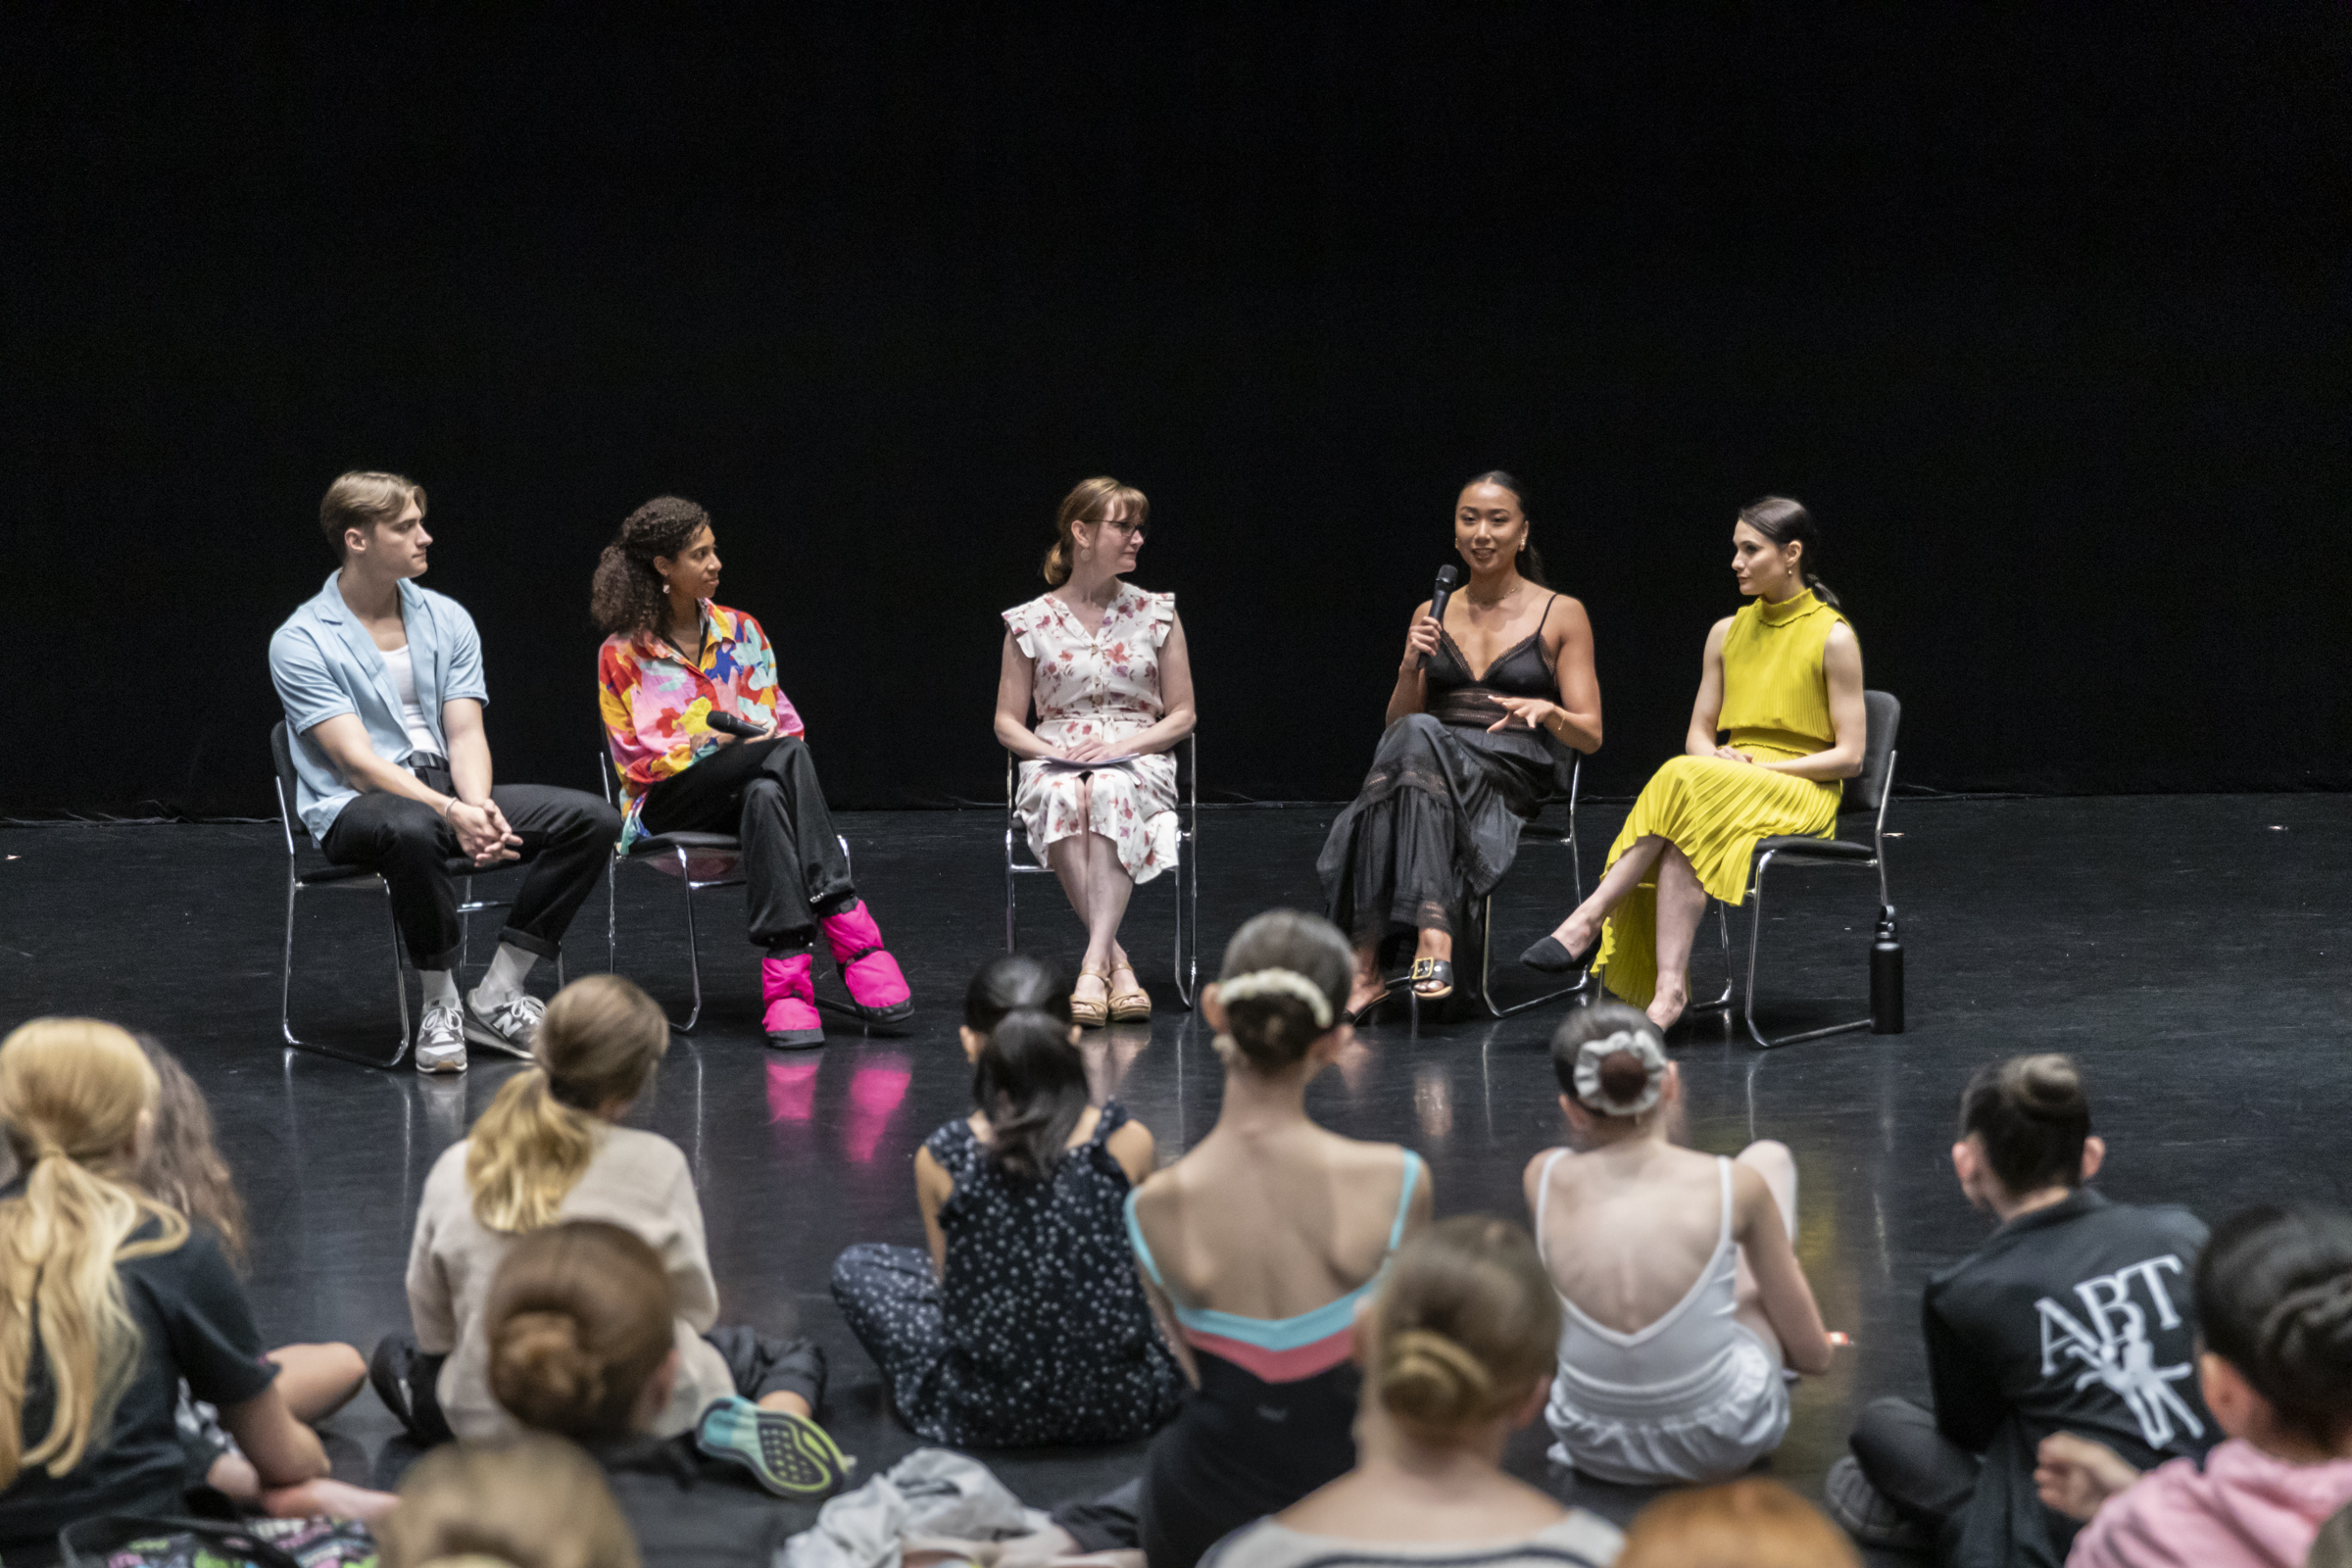 In a black box theater space, one man and four women sit in black chairs facing an audience of young ballet students sitting on the floor.